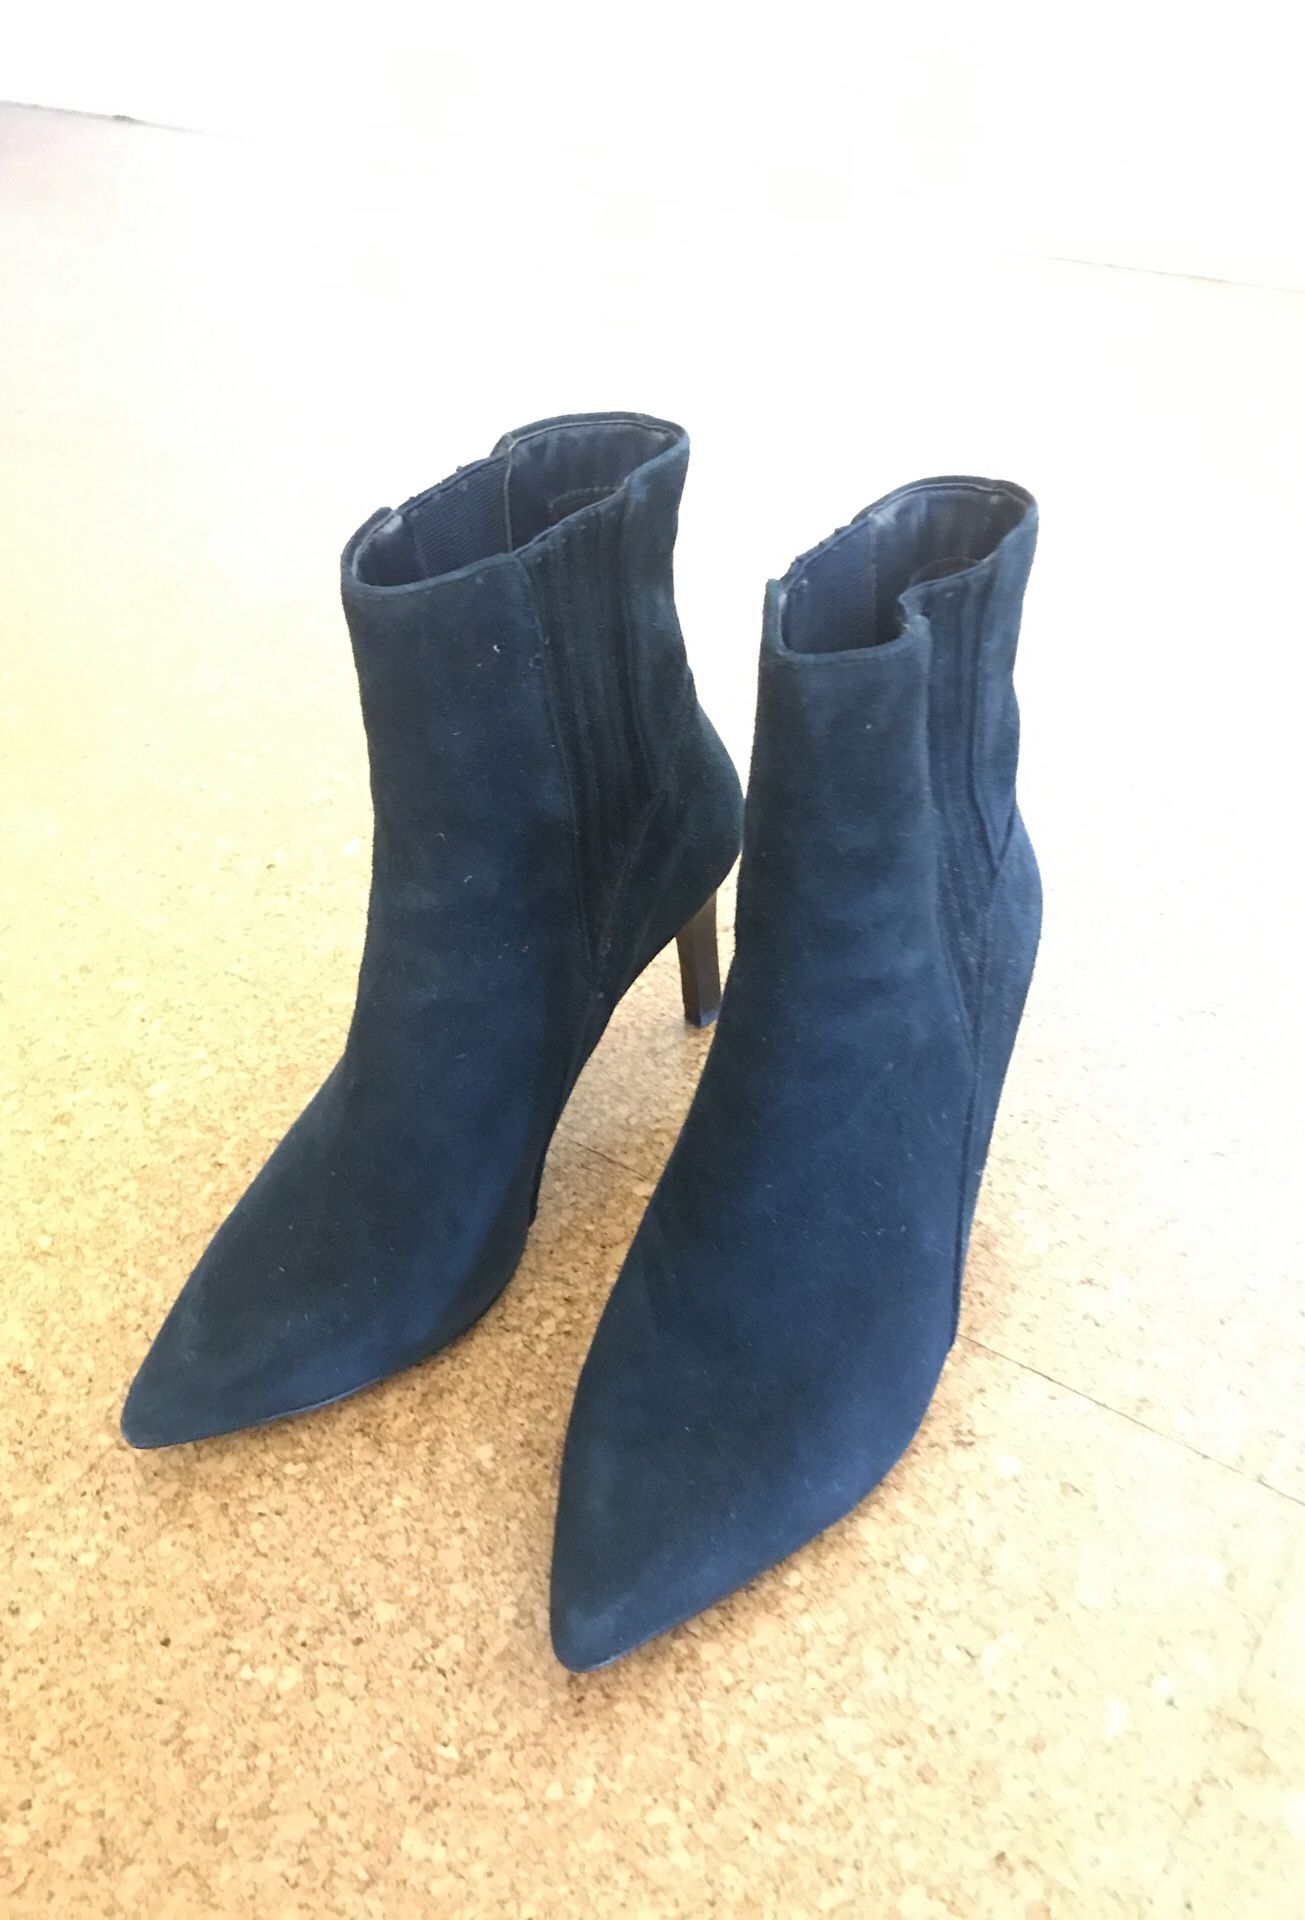 Navy suede effect stiletto ankle boots size 10